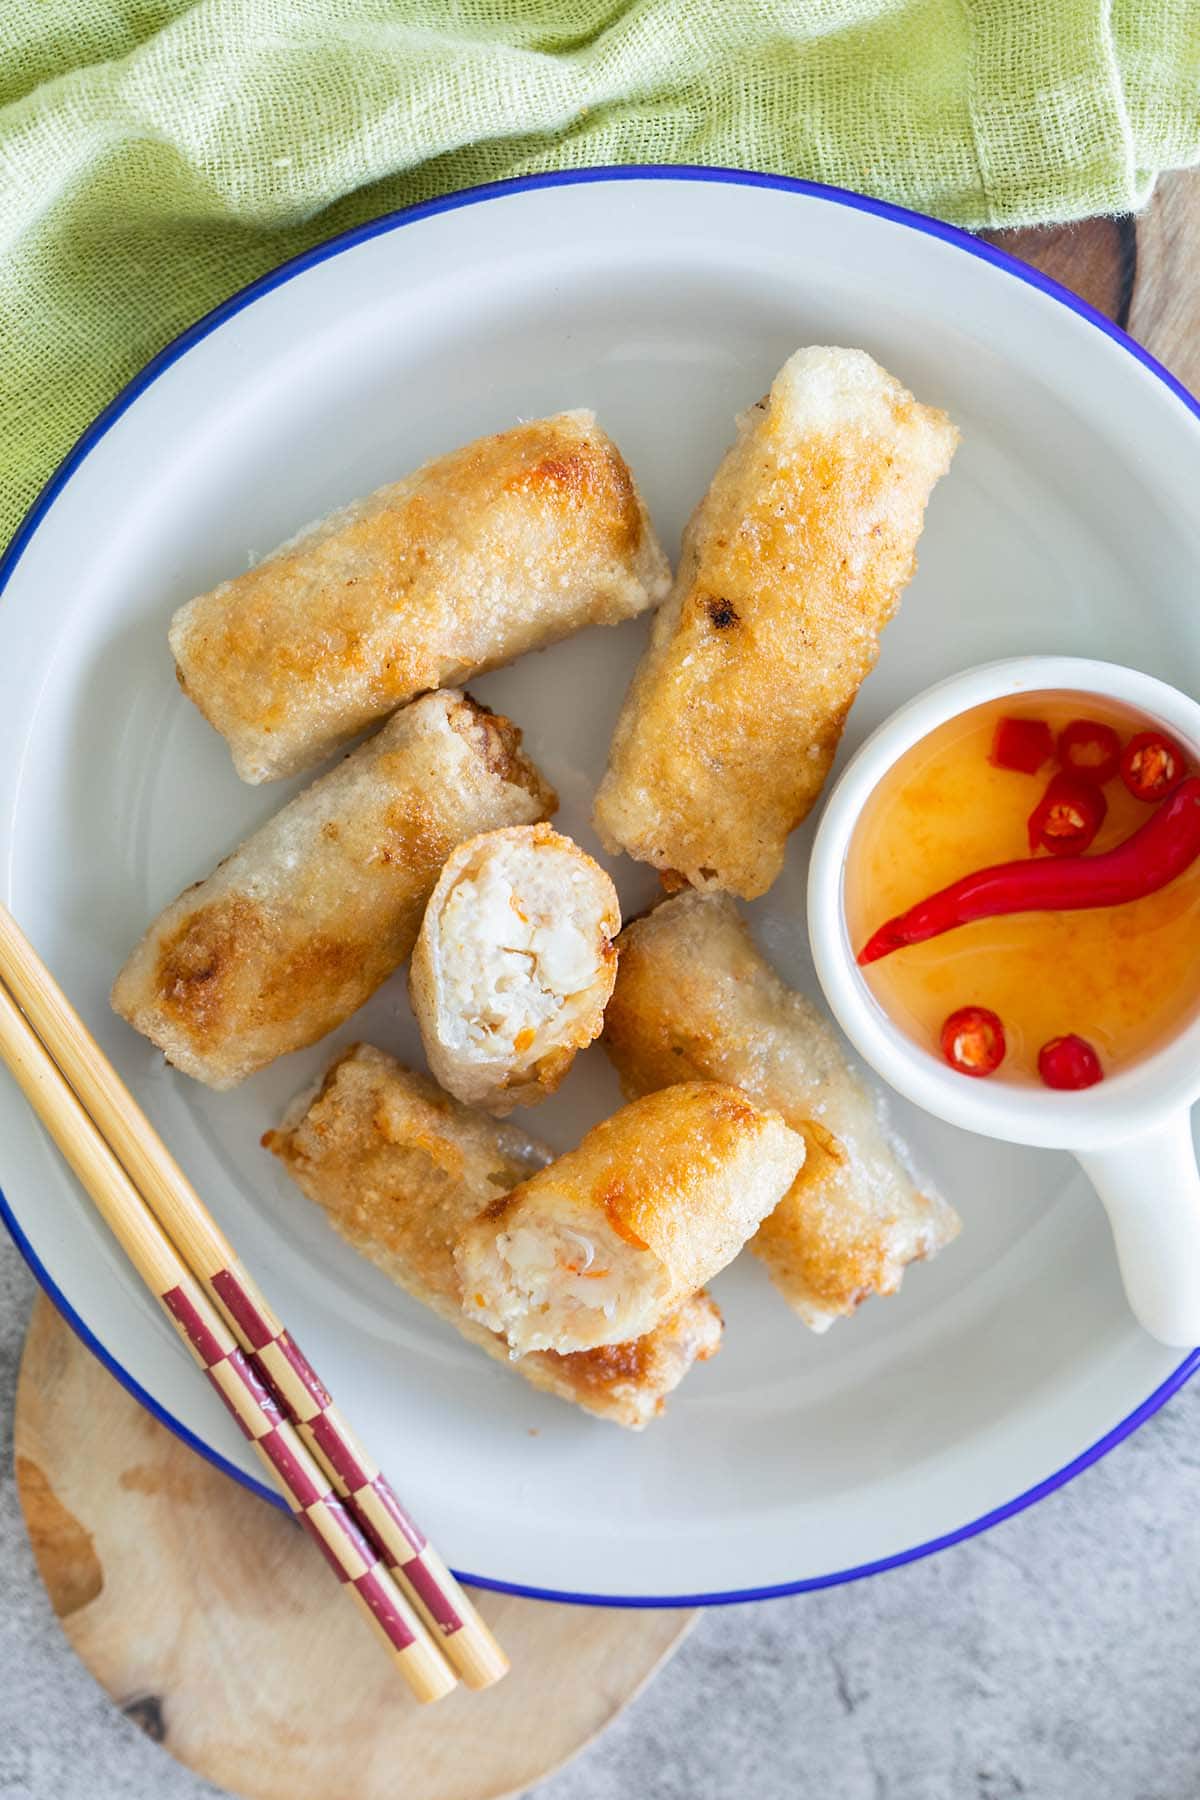 Crispy fried Vietnamese rolls with ground pork filling and served with a dipping sauce.